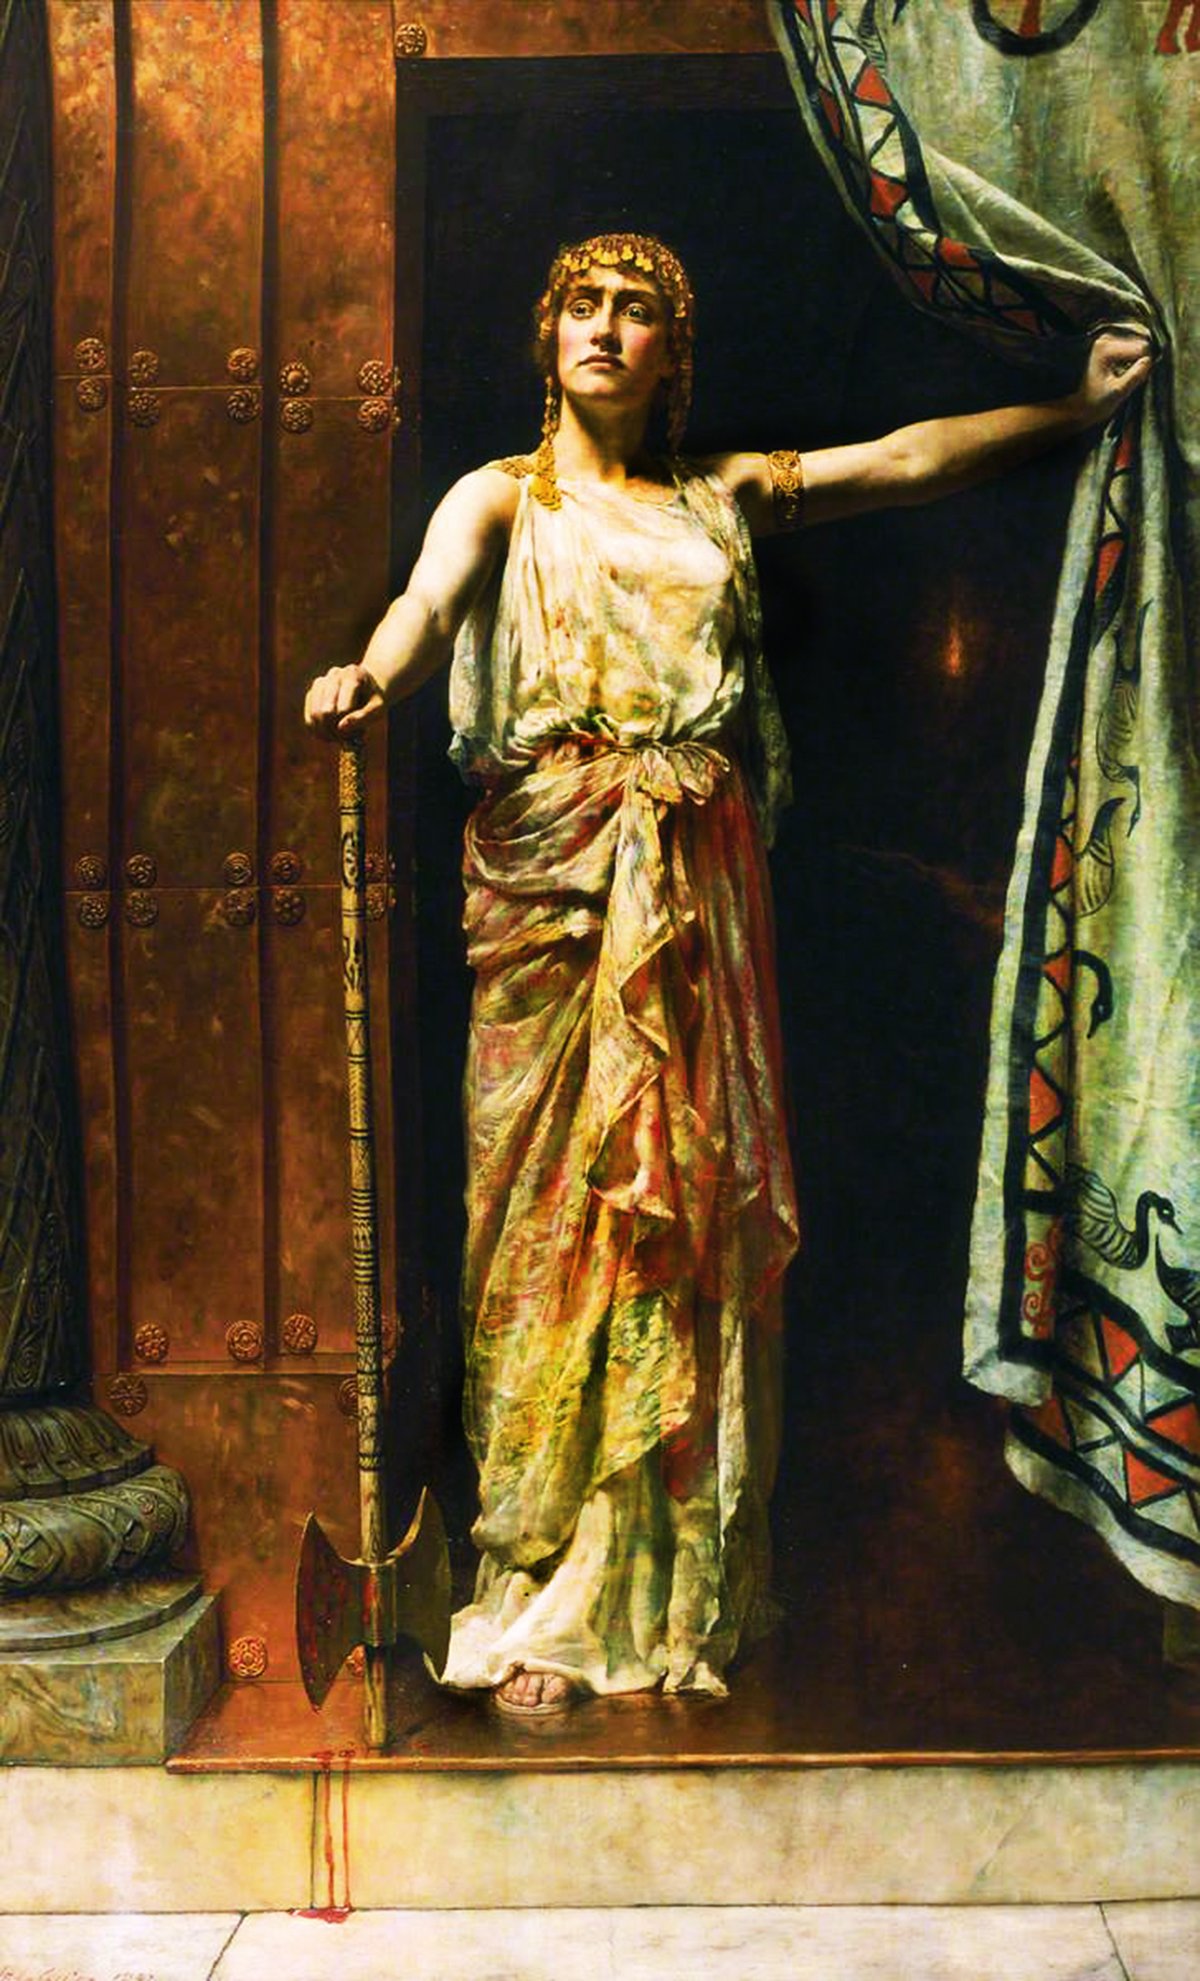 Painting "Clytemnestra" by John Collier, 1882, depicting a regal woman in ancient Greek attire holding a scepter and an axe, with a bloodstain on the ground, symbolizing her role in the murder of Agamemnon.